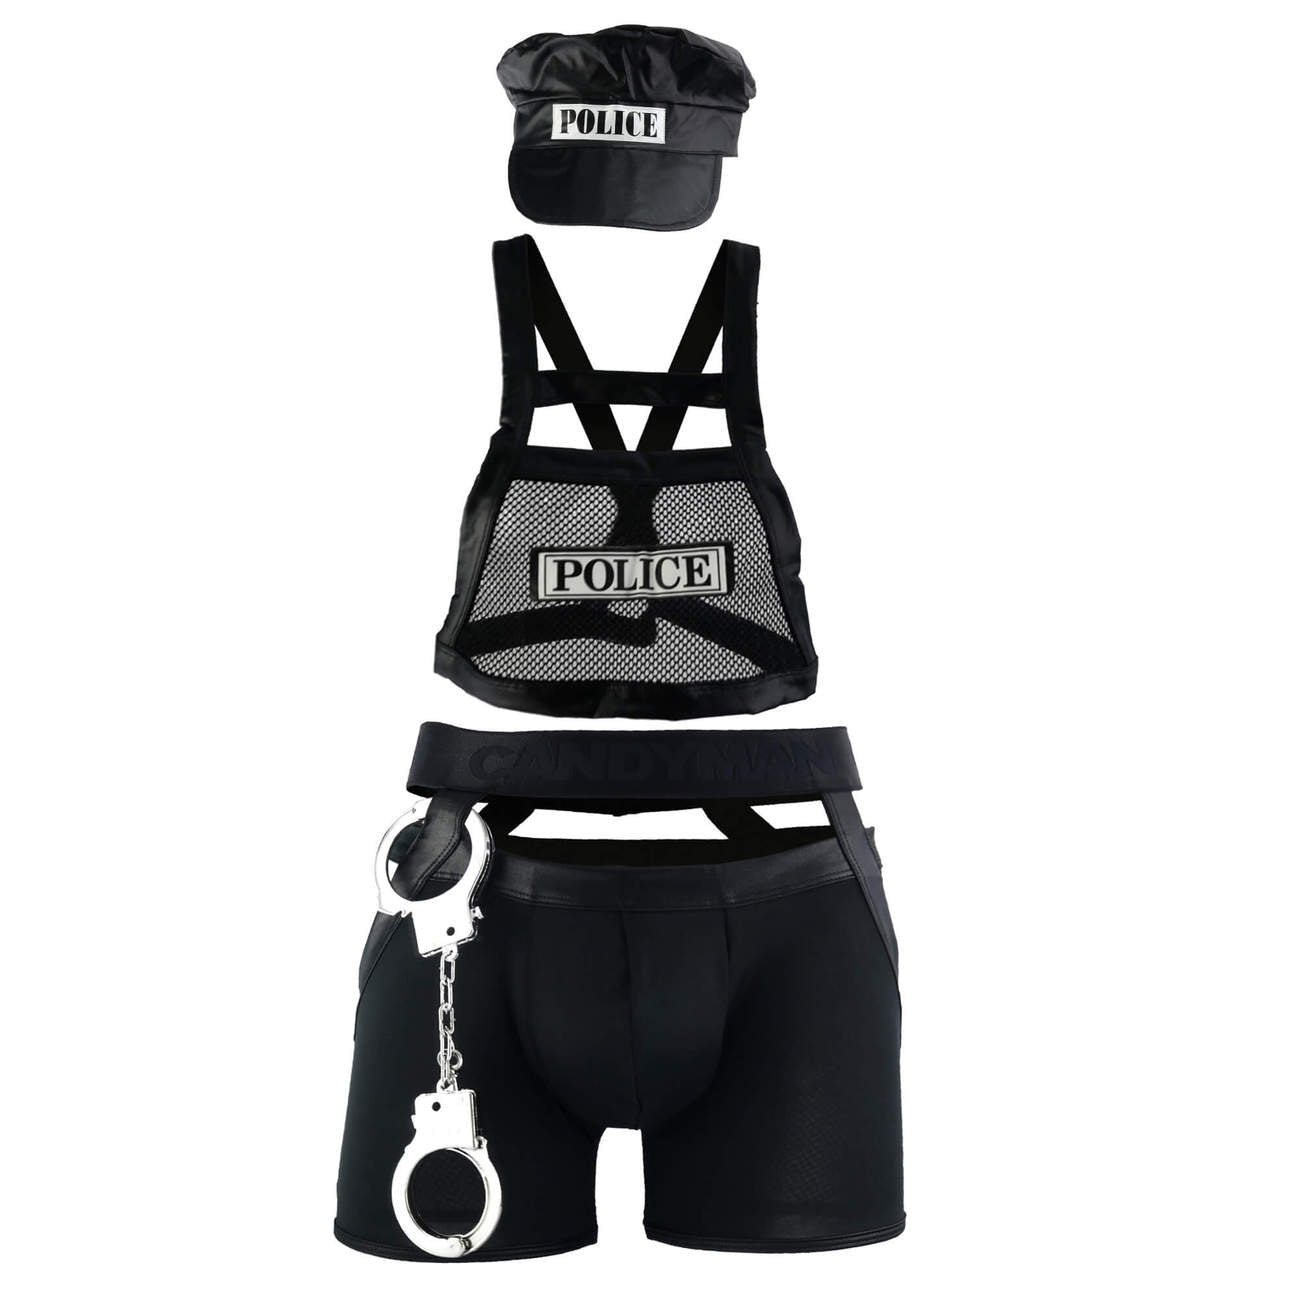 CandyMan 99152 Police Outfit Black